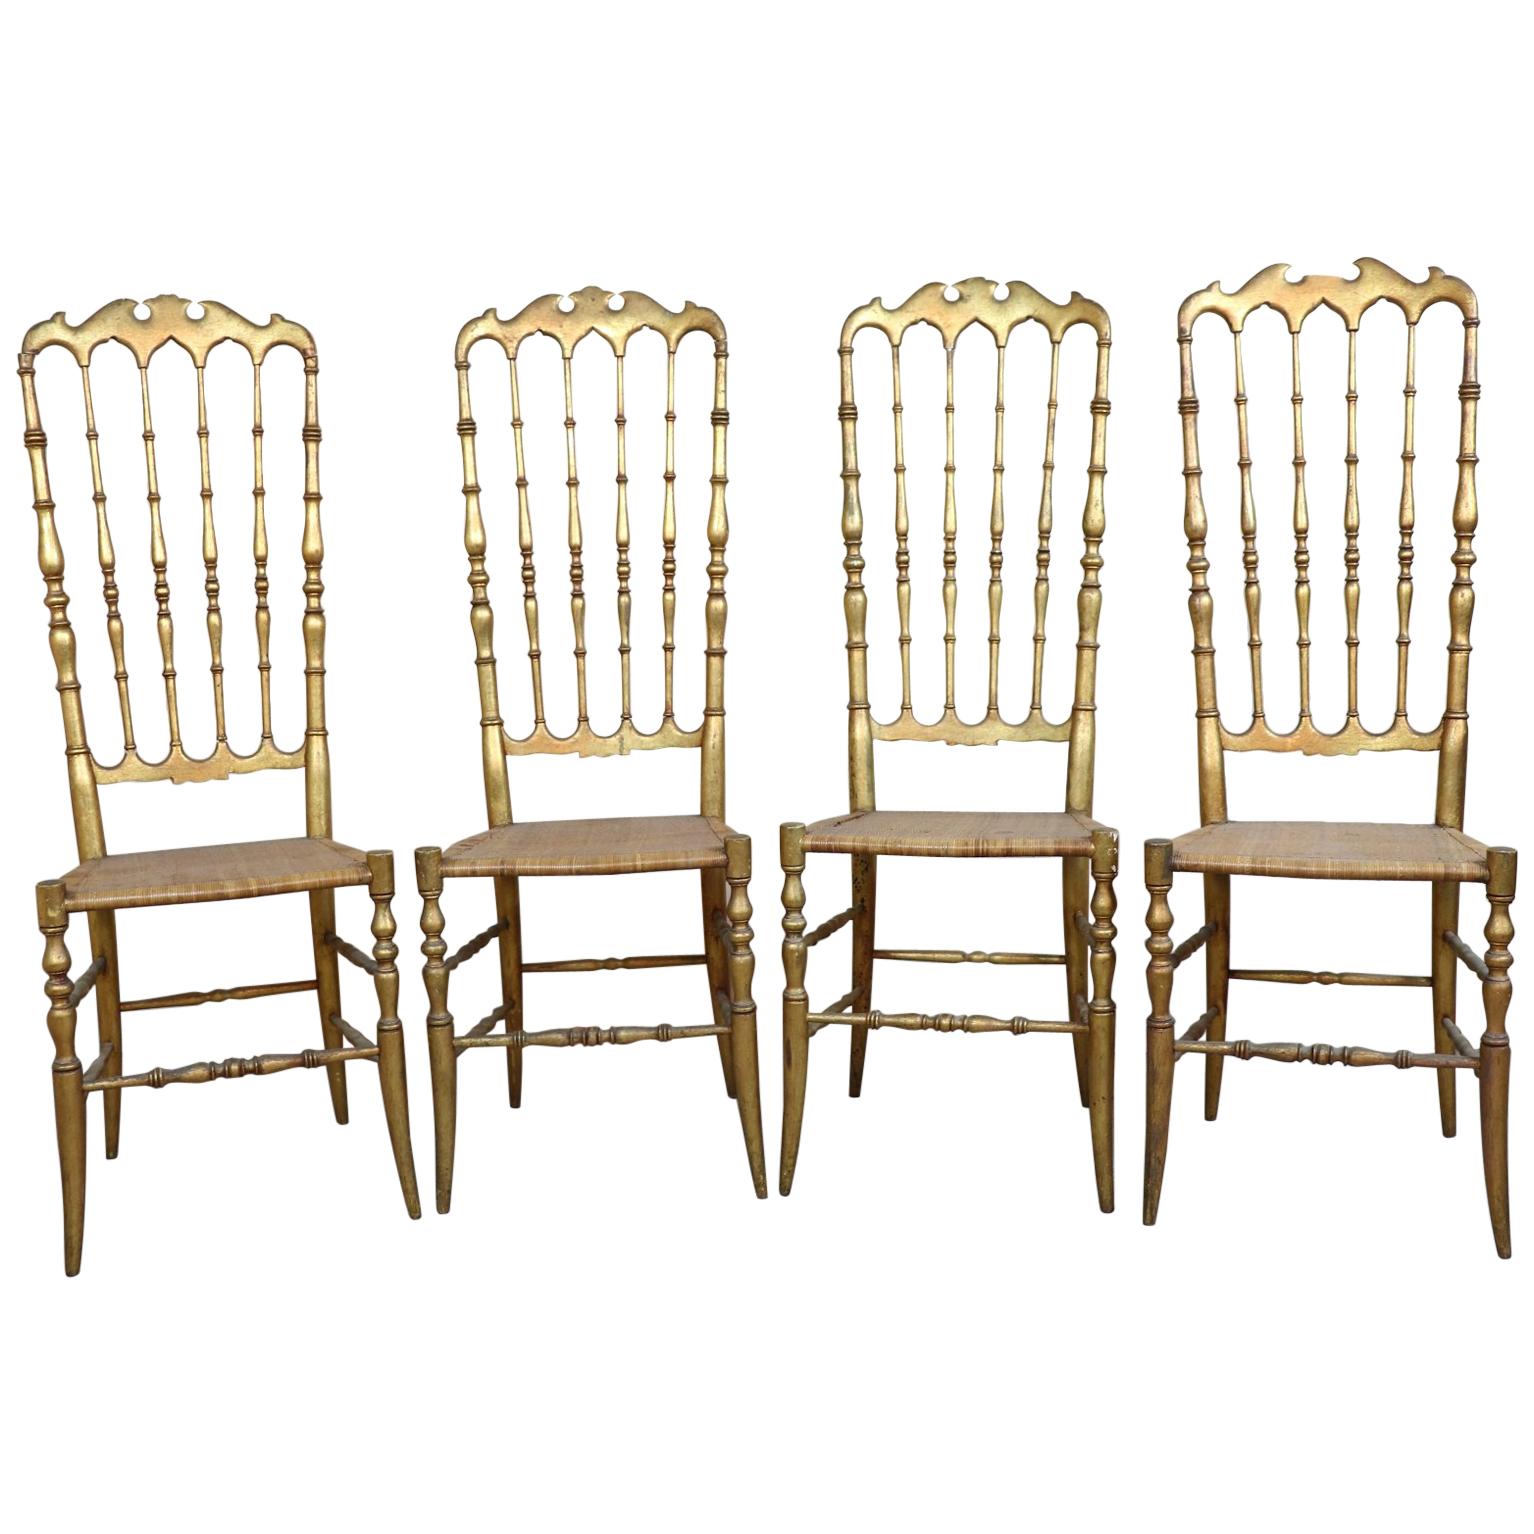 19th Century Italian Set of Four Turned and Gilded Wooden Famous Chiavari Chairs